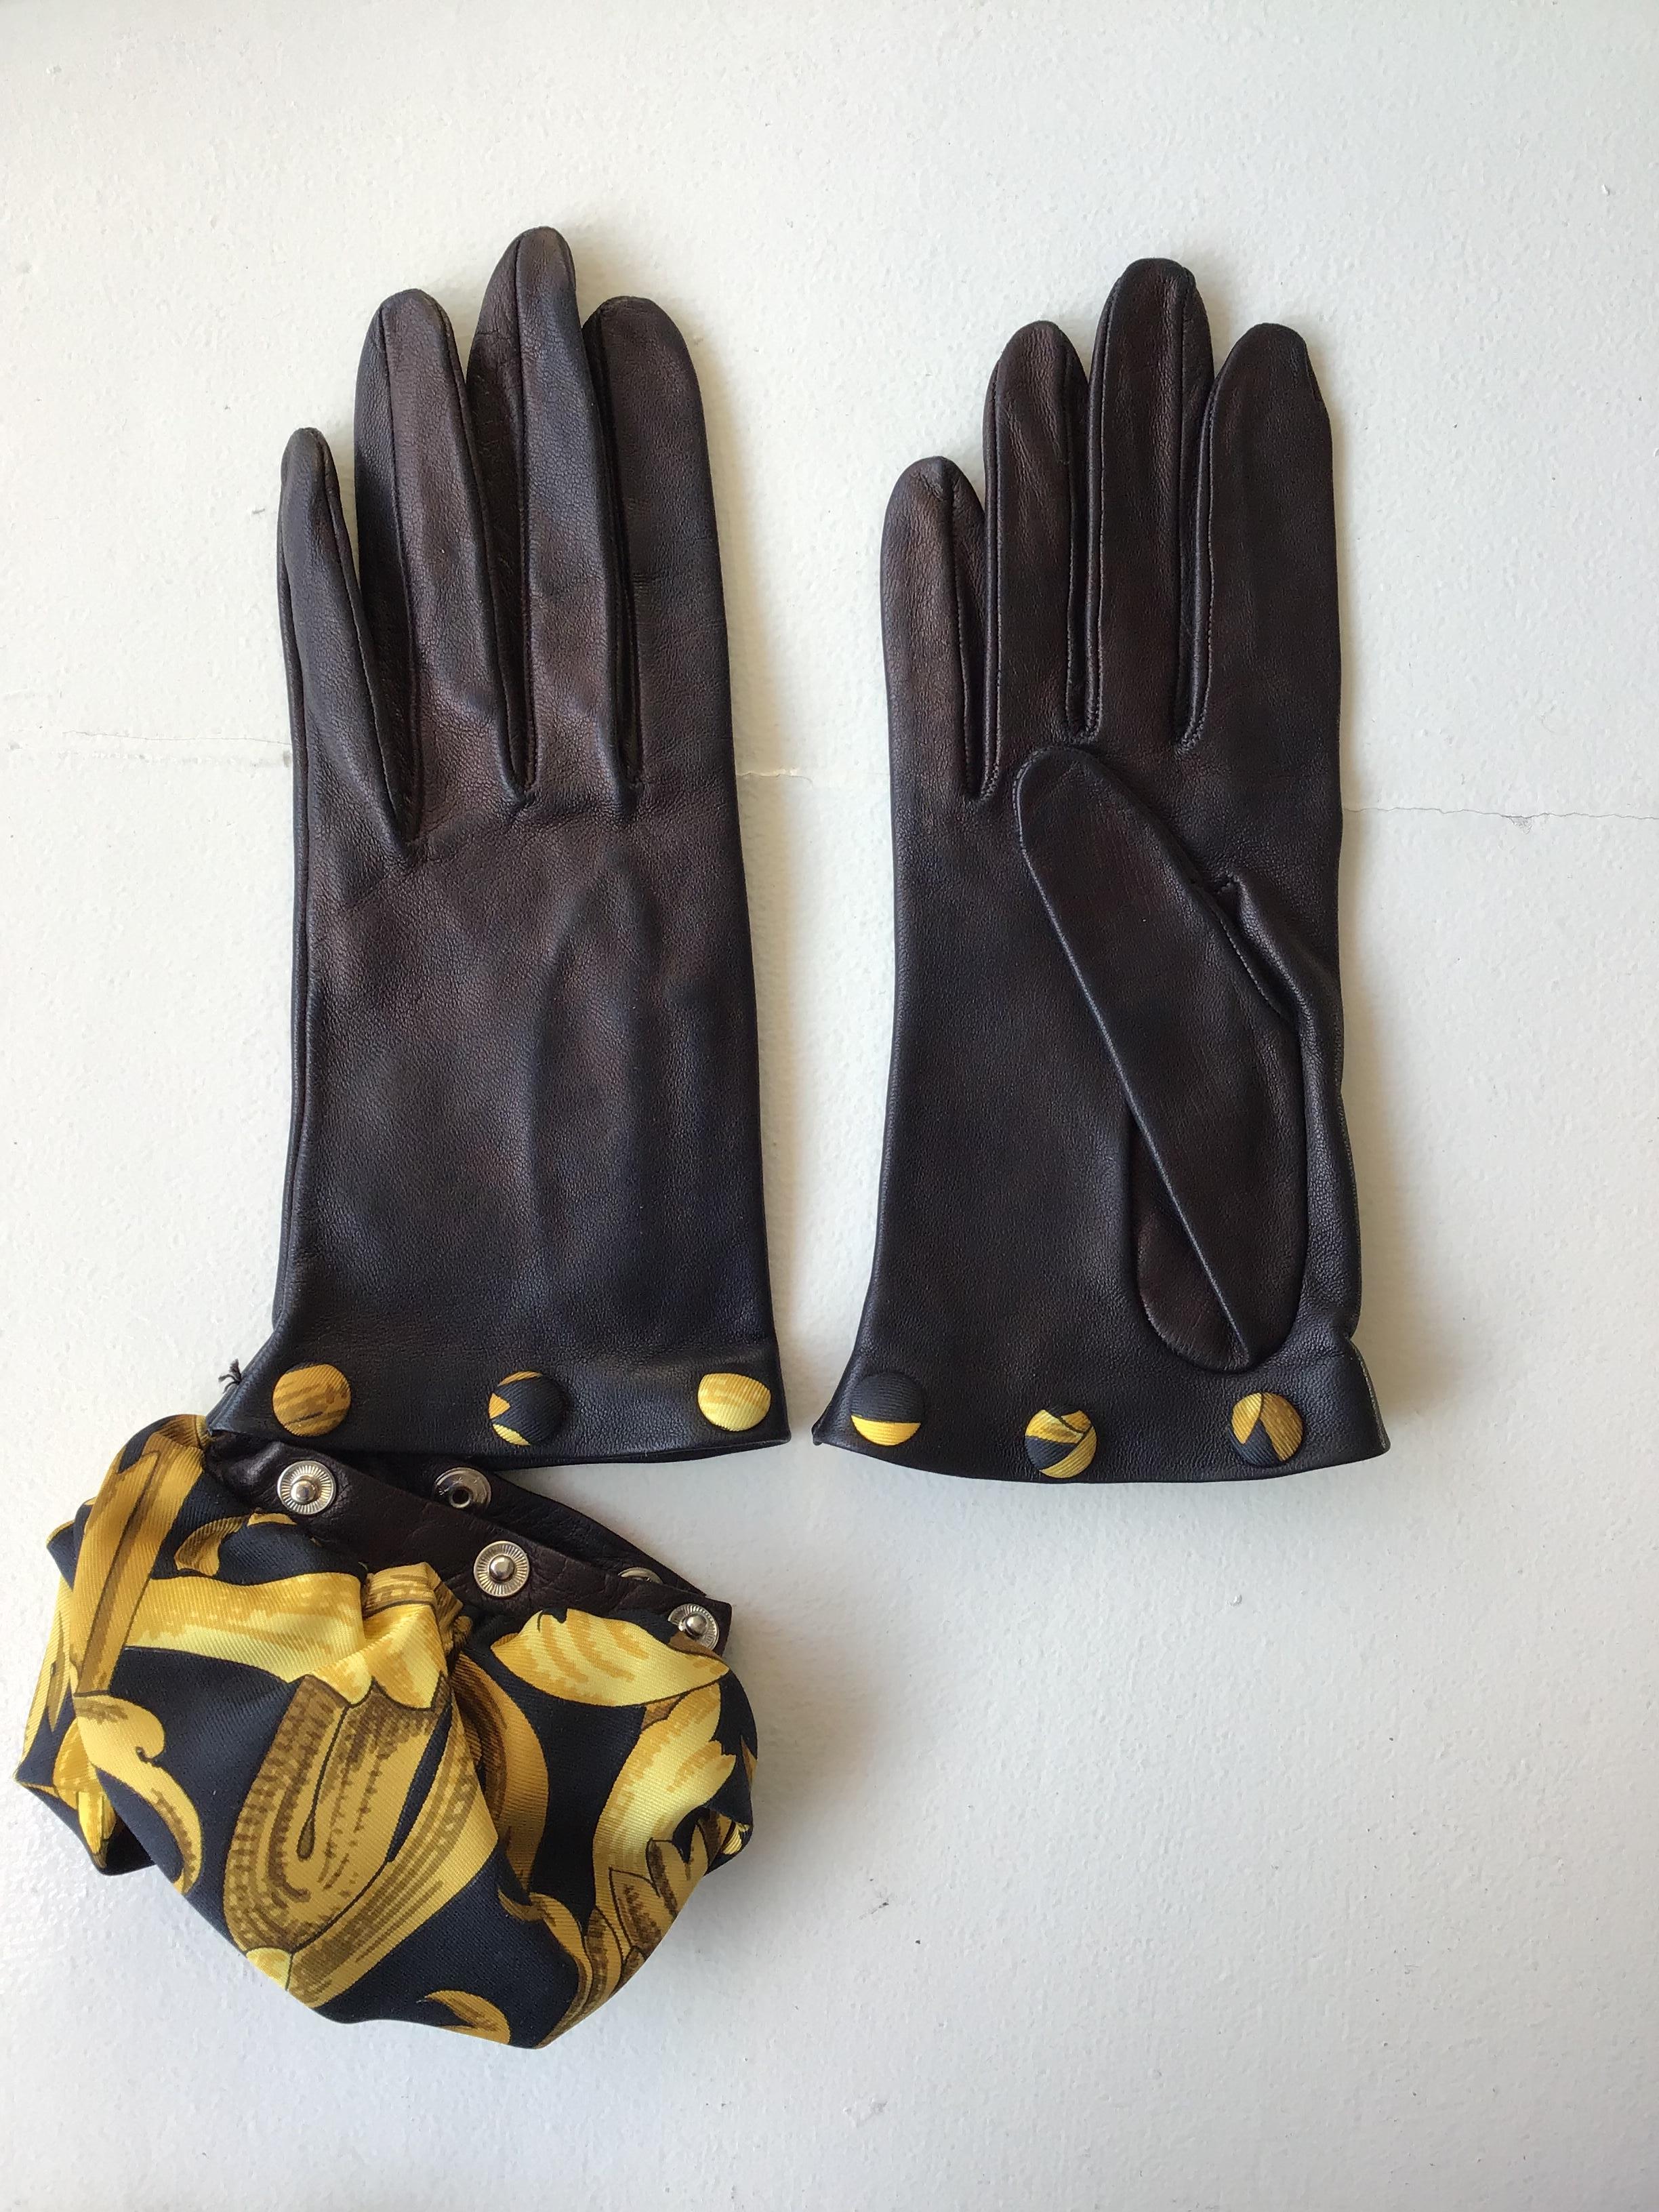 Hermes Black Leather Gloves with Optional Silk Cuffs. The gloves are composed of a calfskin leather, with suede interior, and a signature Hermes print cuff. The silk scarf cuff features a black background with gold accents in undulating, floral